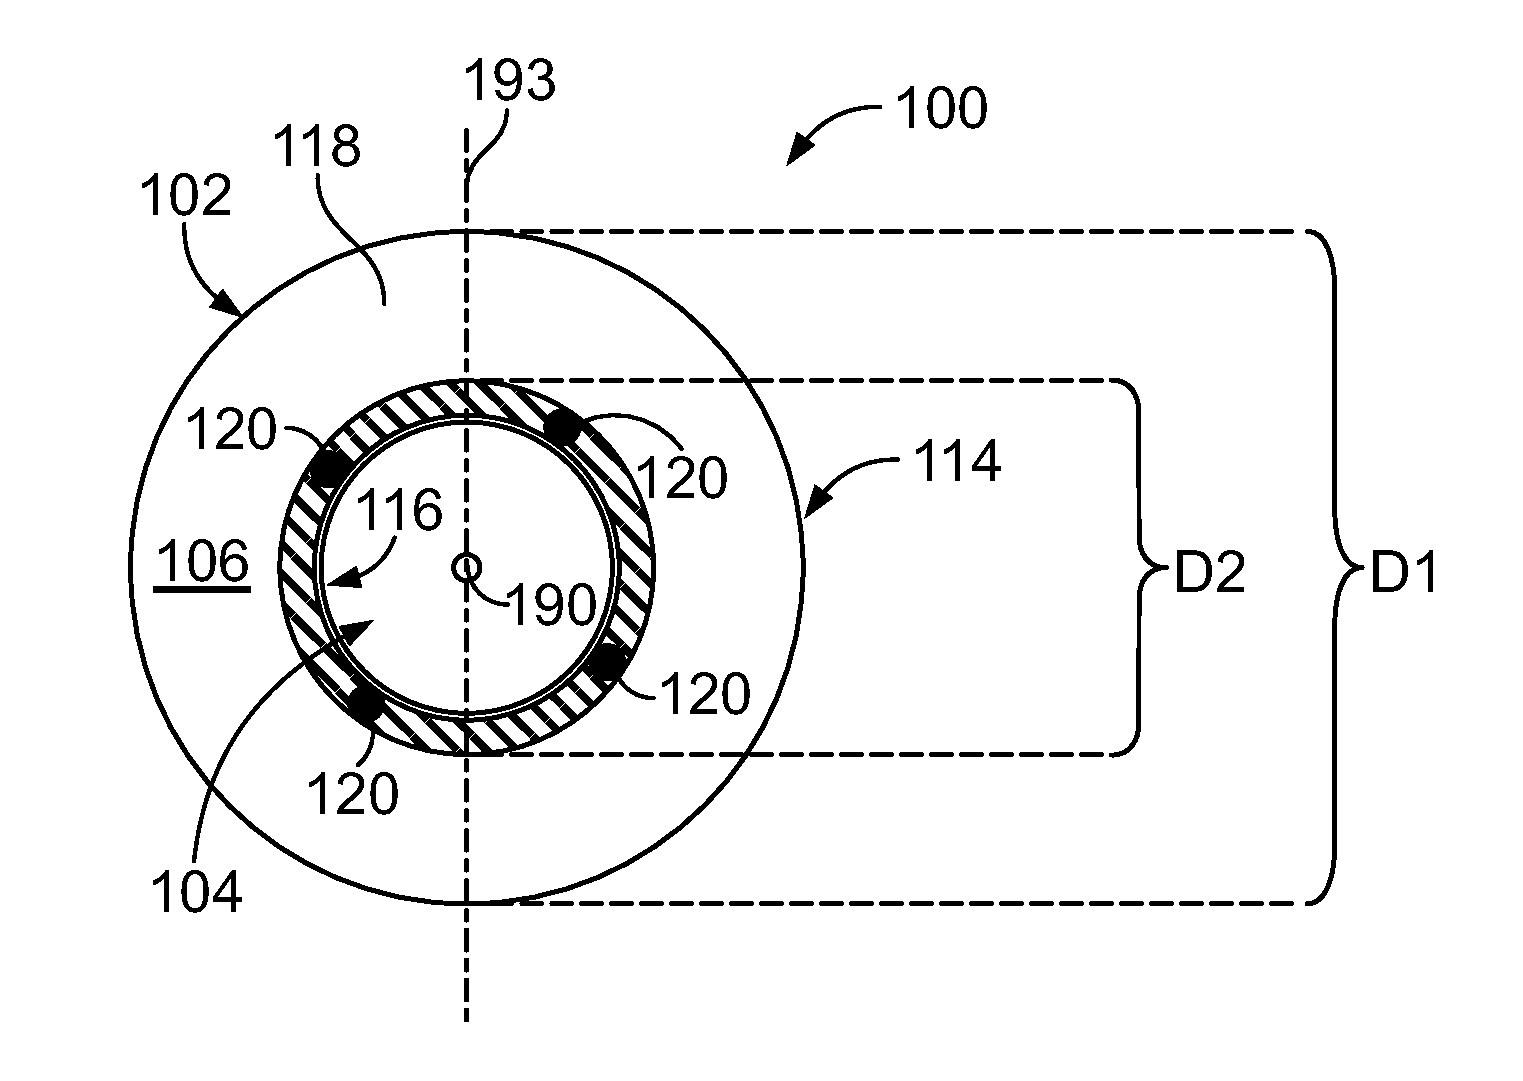 Microvessels, microparticles, and methods of manufacturing and using the same